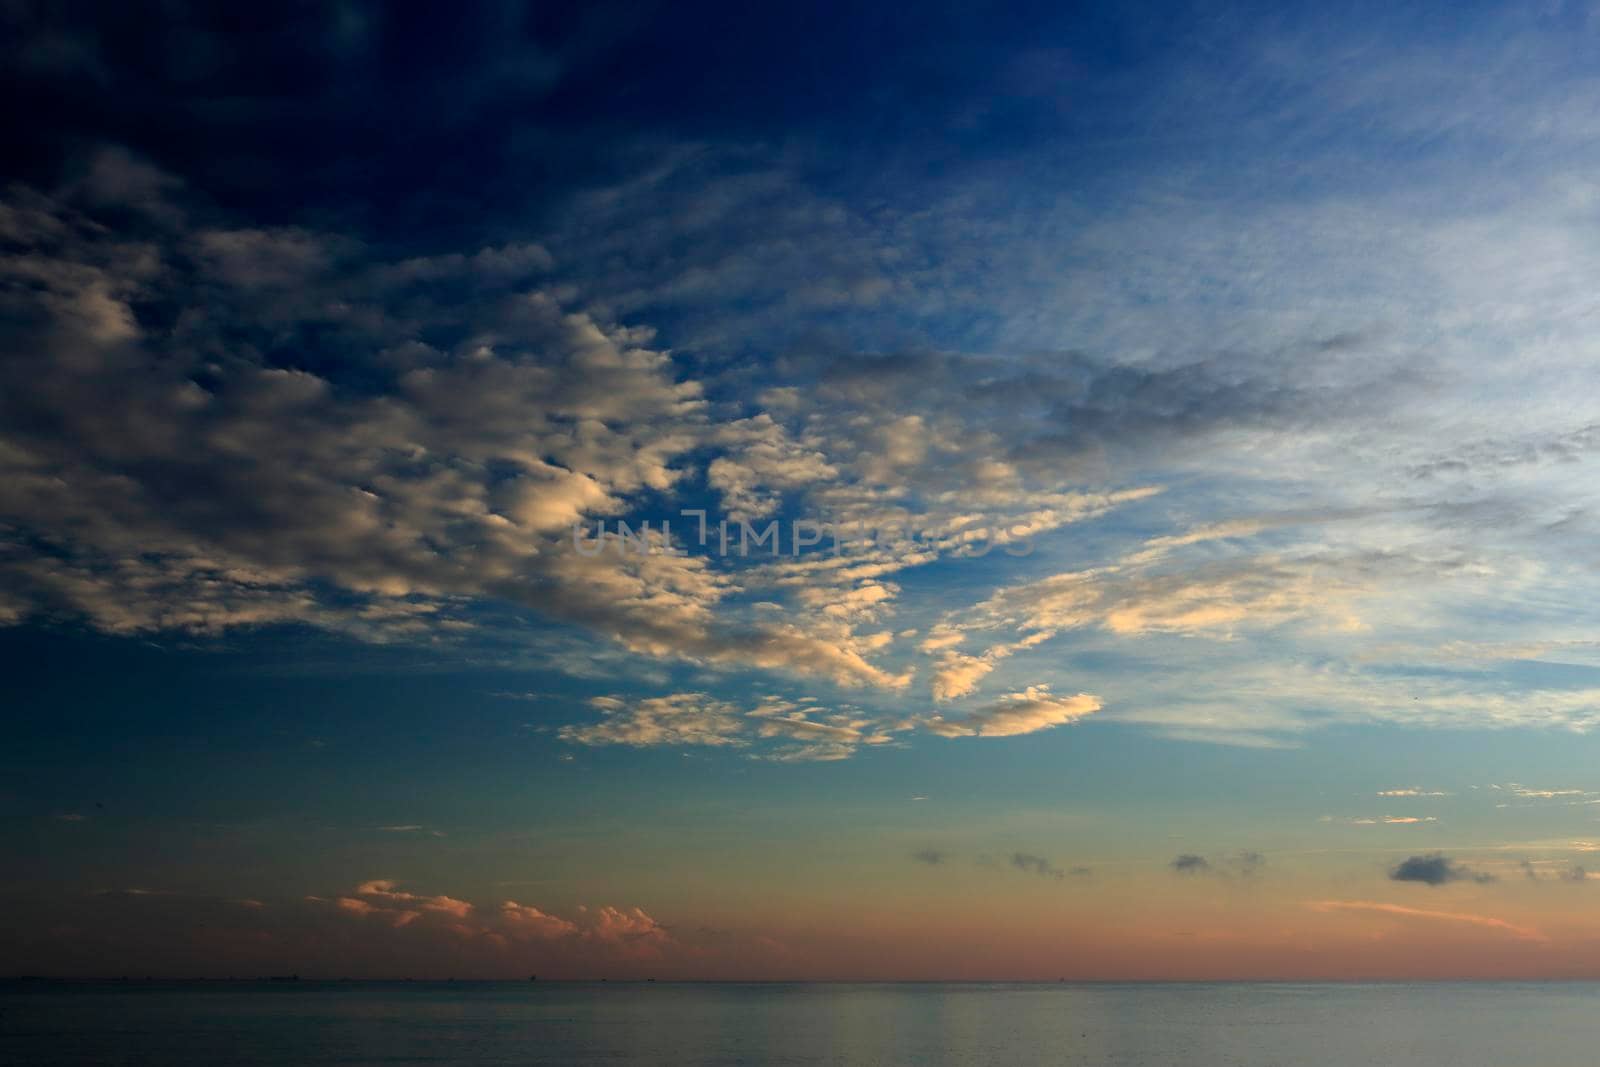 morning sunrise from the sea of ​​clouds and brightly colored skies by nuisk17